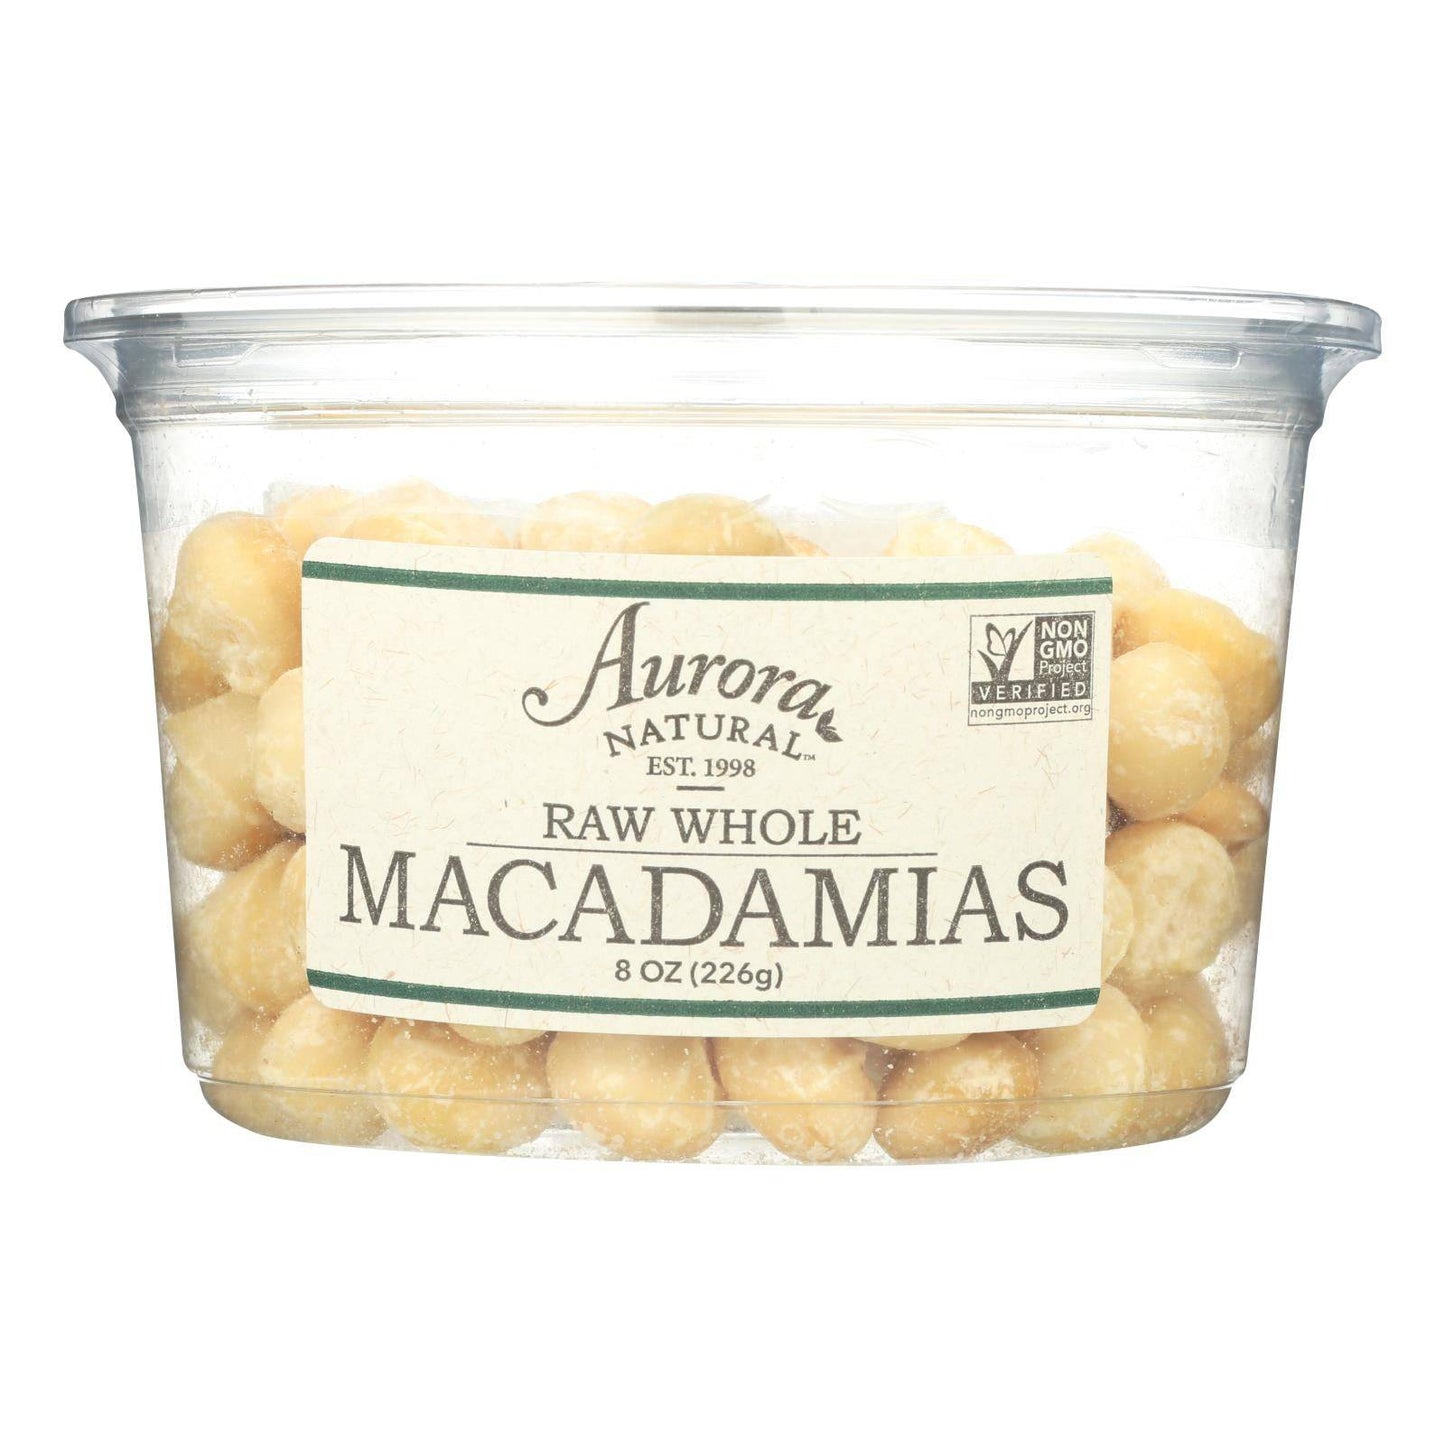 Aurora Natural Products - Raw Whole Macadamias - Case Of 12 - 8 Oz. | OnlyNaturals.us